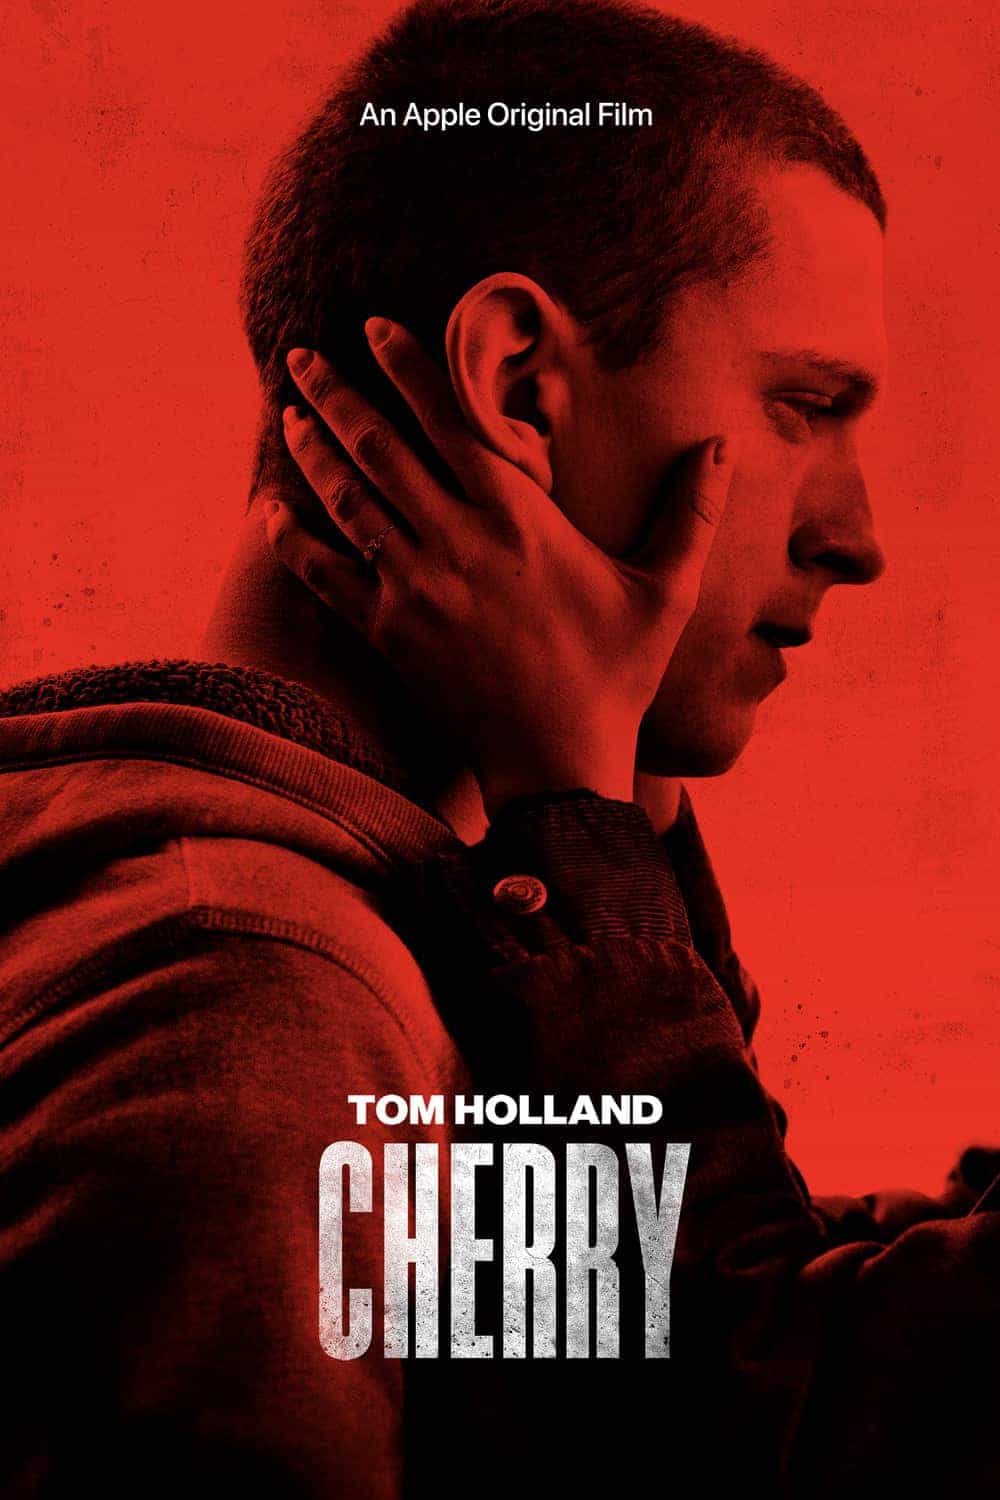 Apple TV release a trailer for their upcoming movie Cherry, directed by The Russo Brothers and starring Tom Holland